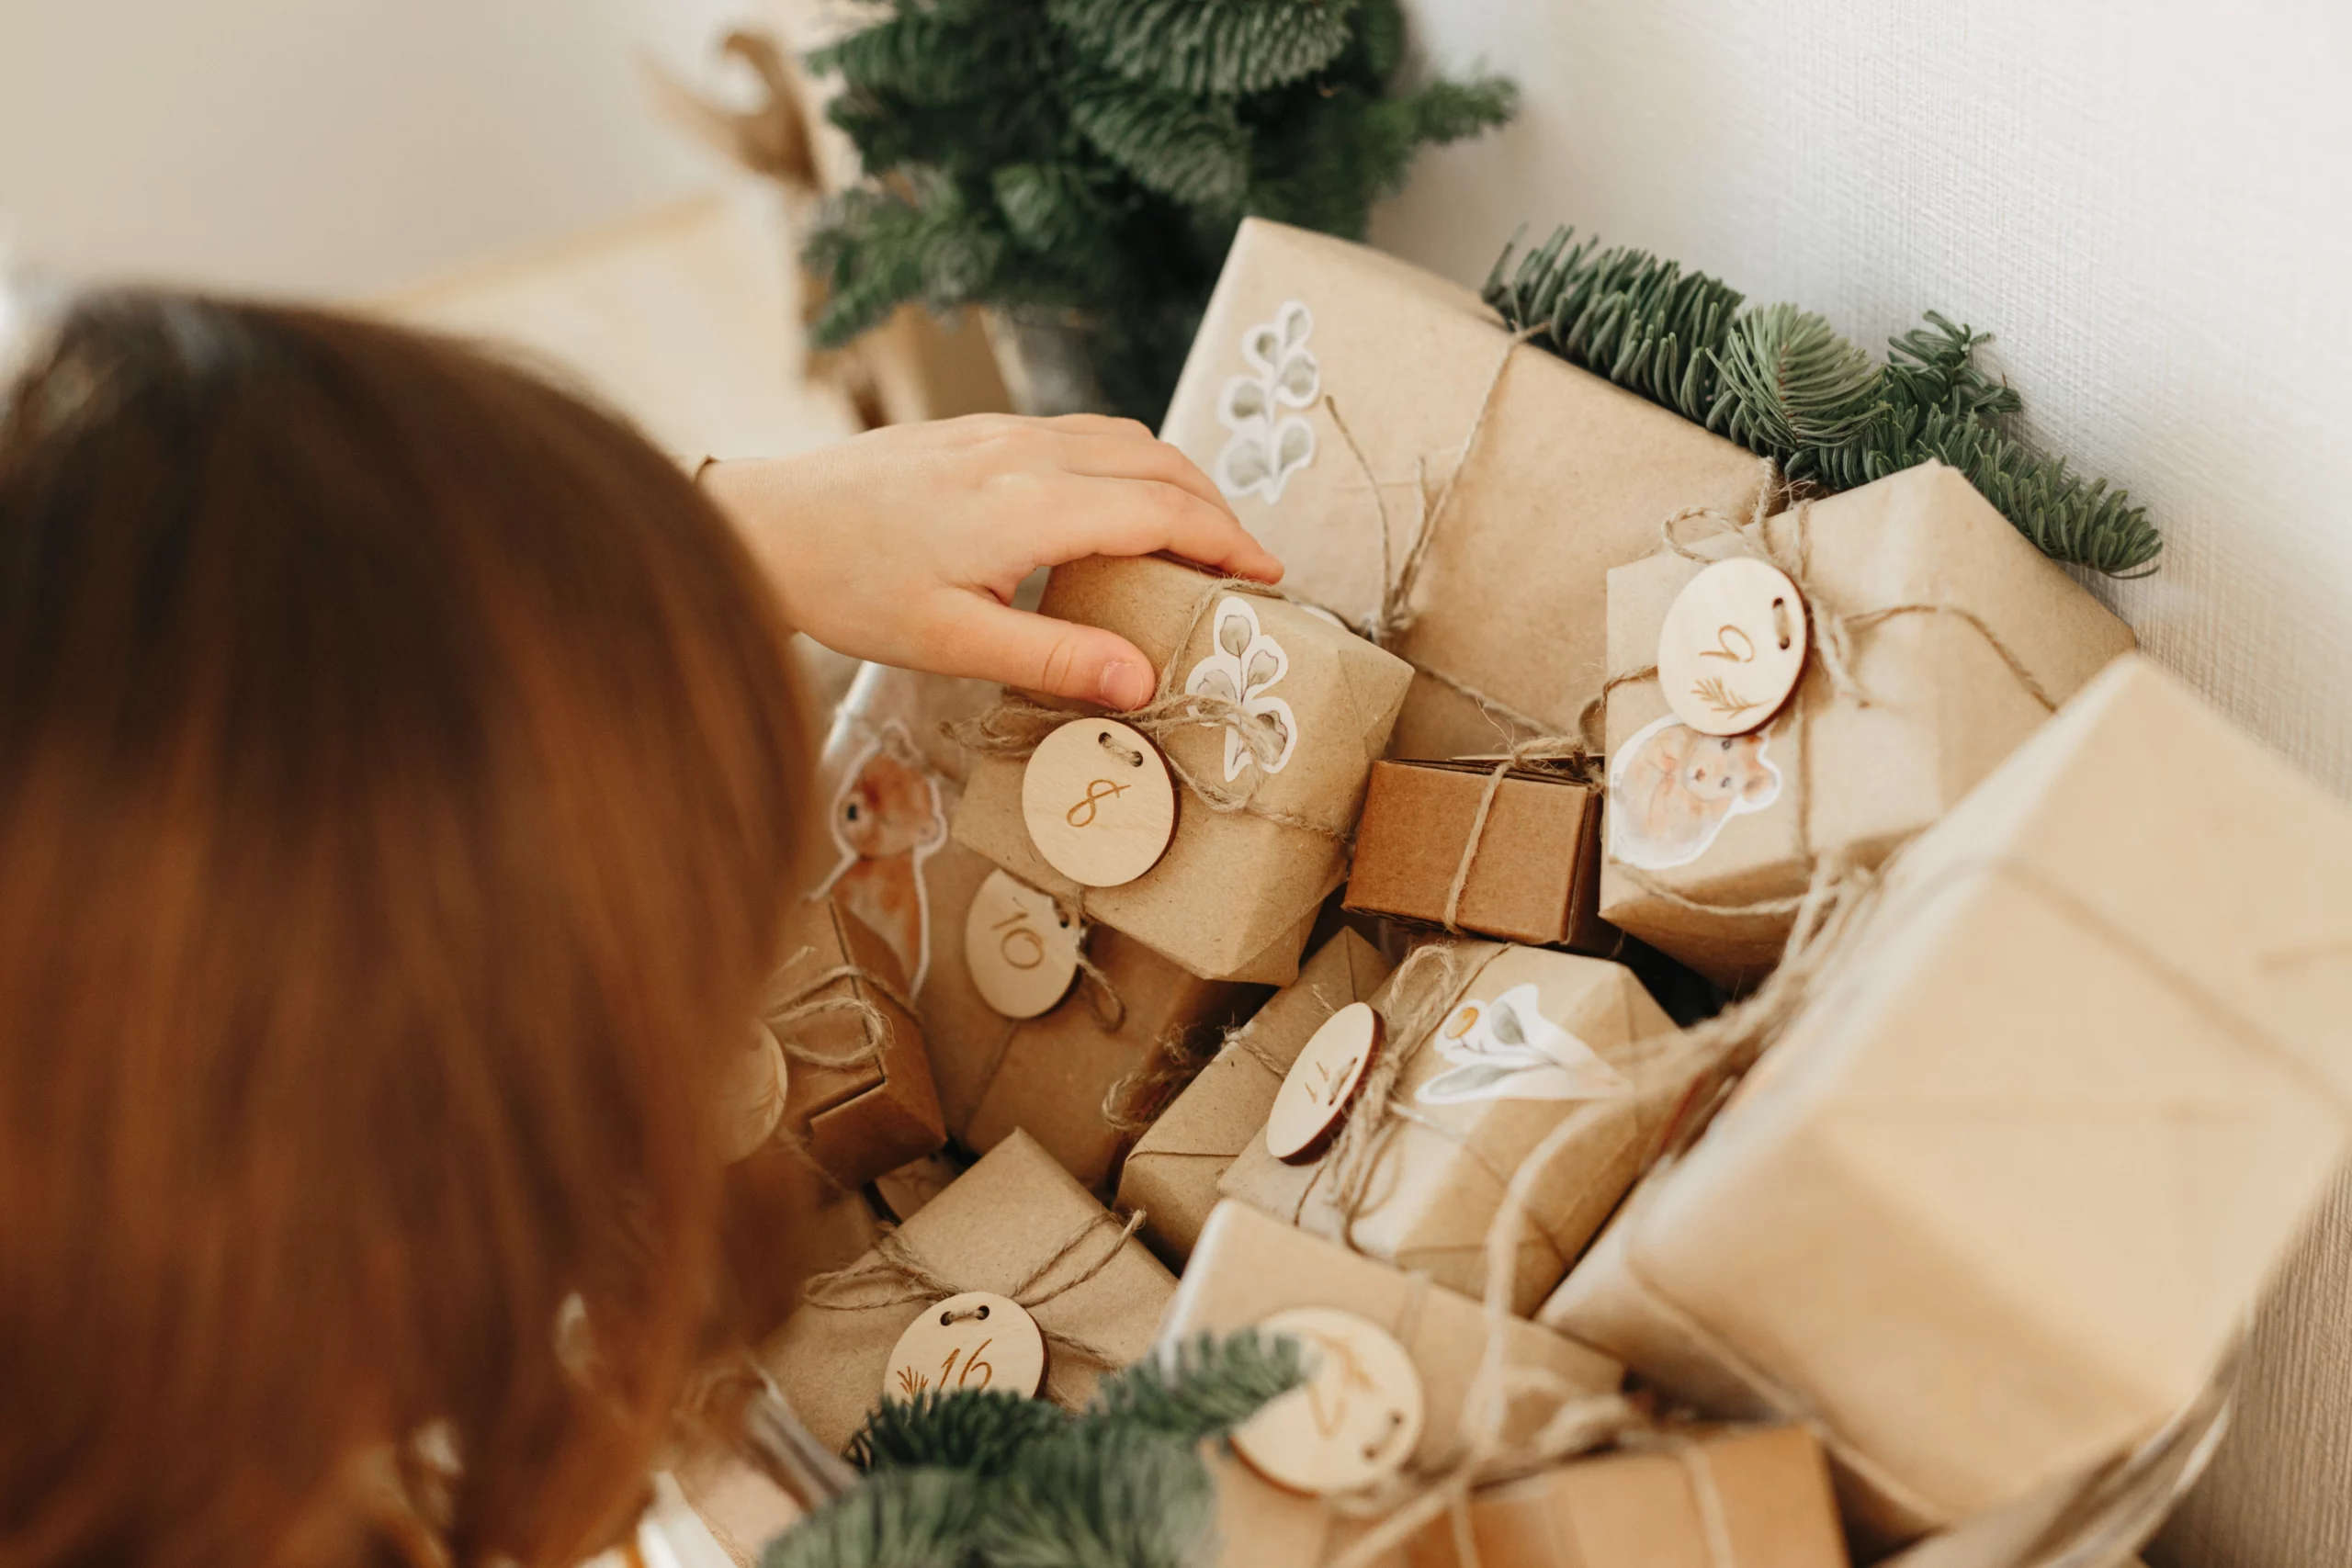 cheap but thoughtful christmas gifts: lucky dip | Swoosh Finance